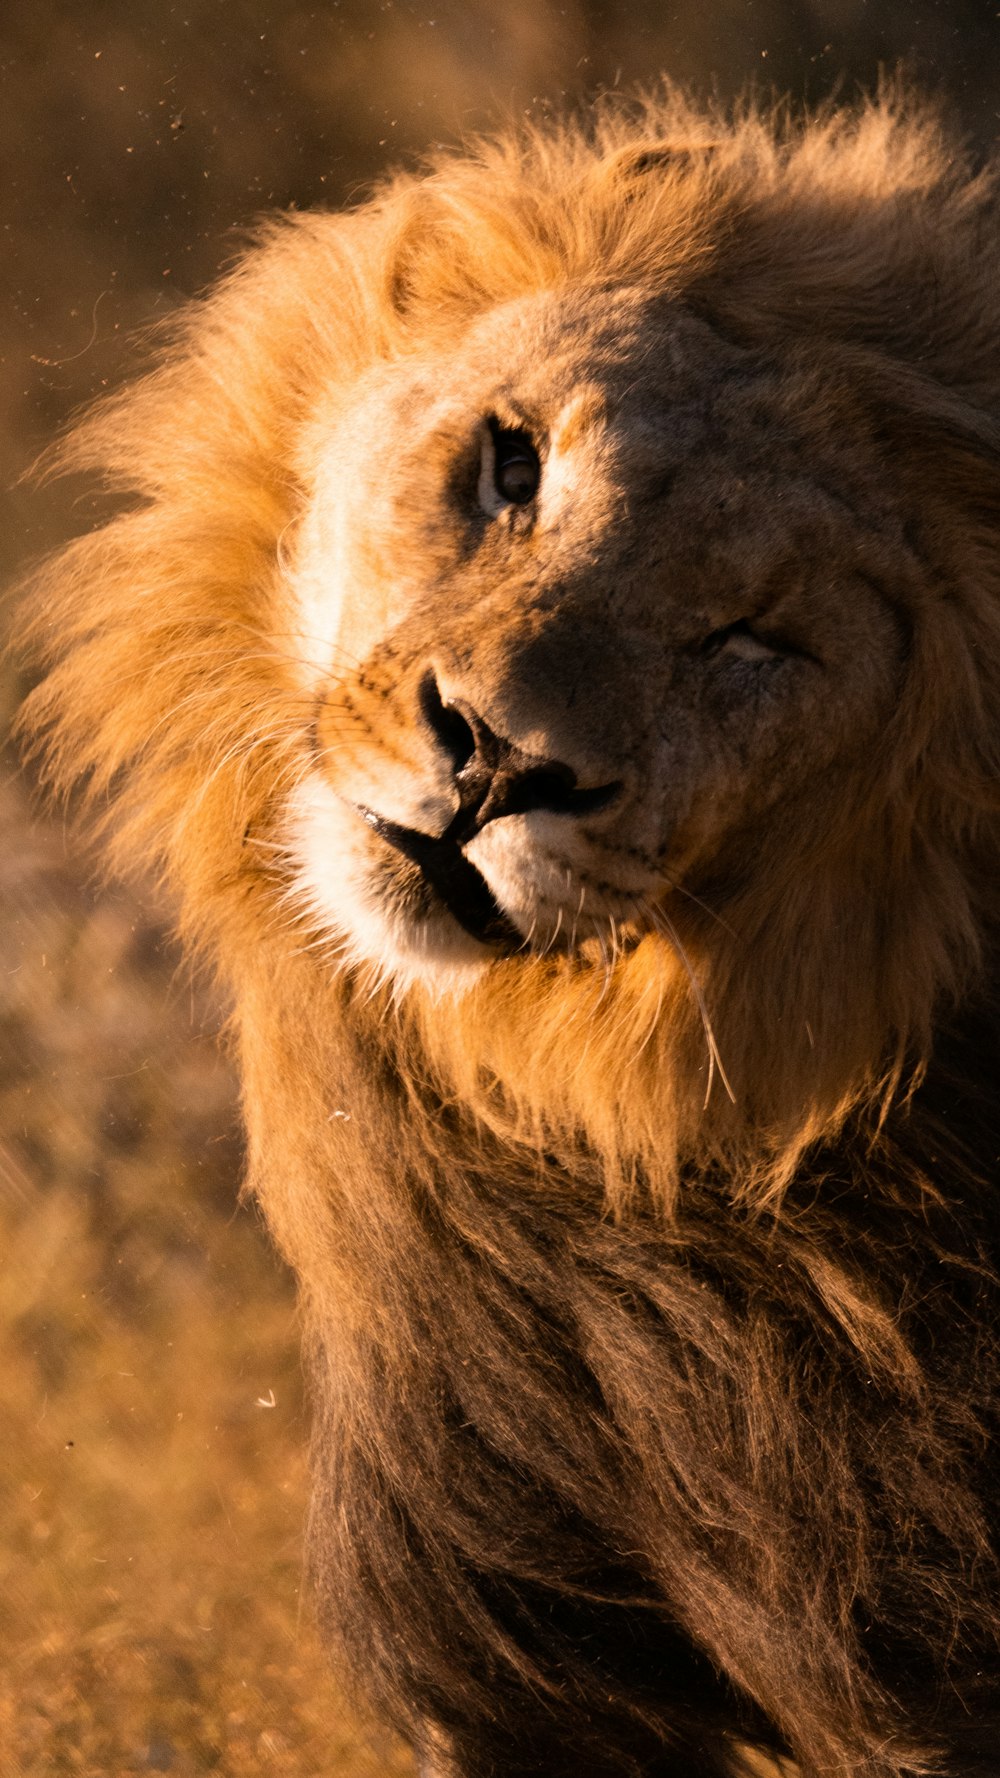 a close up of a lion in a field